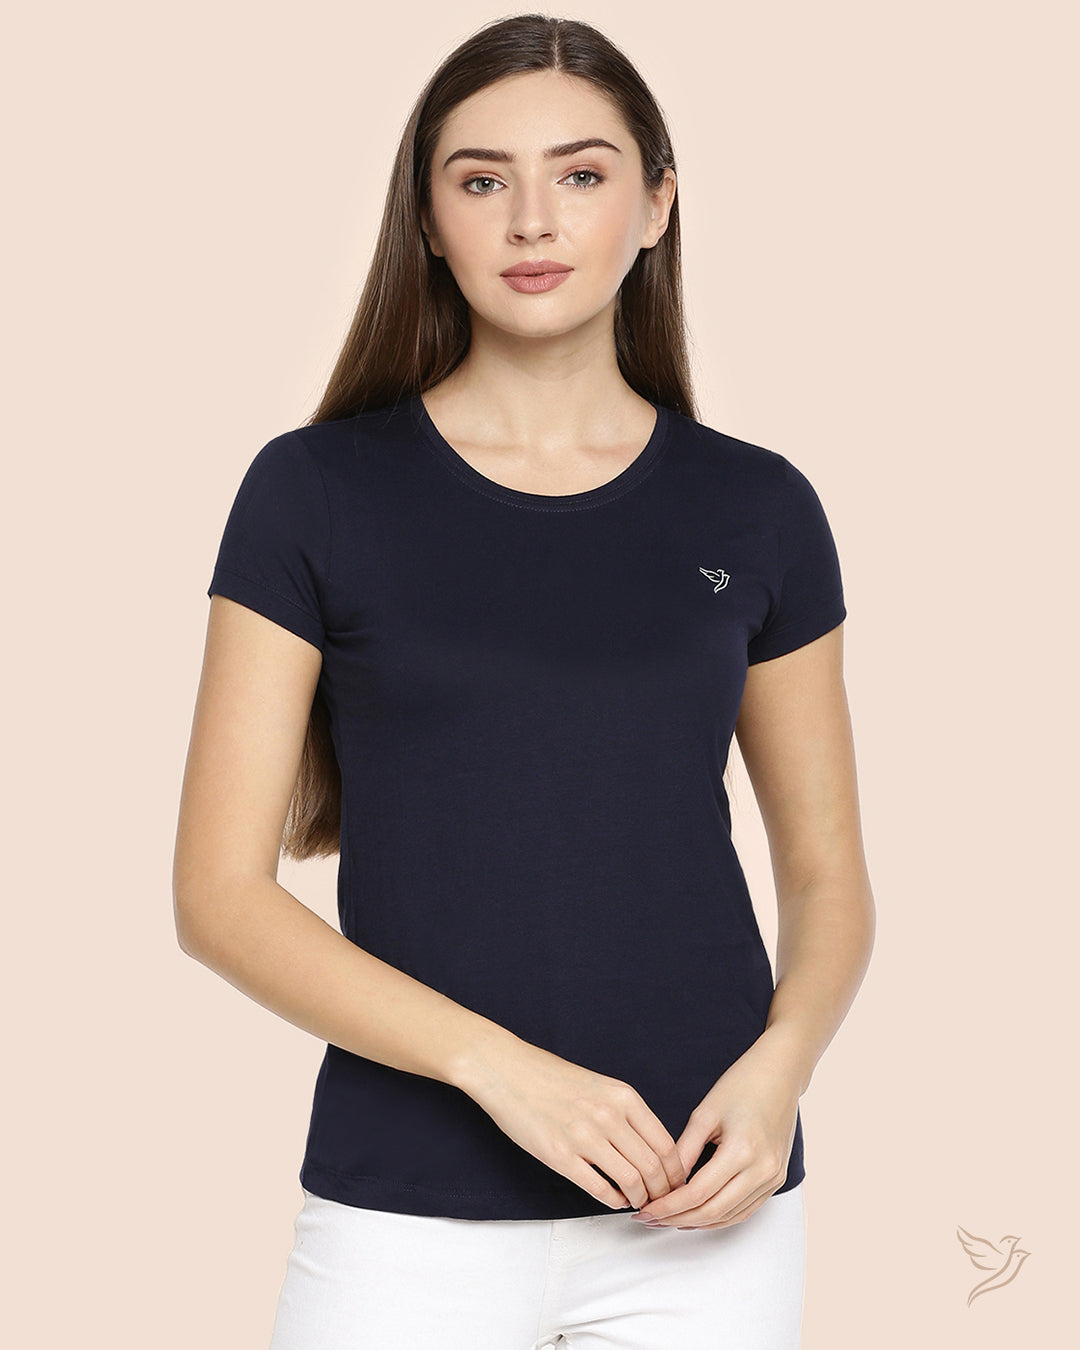 Navy Ribbon Slim Fit Signature Tee for Women